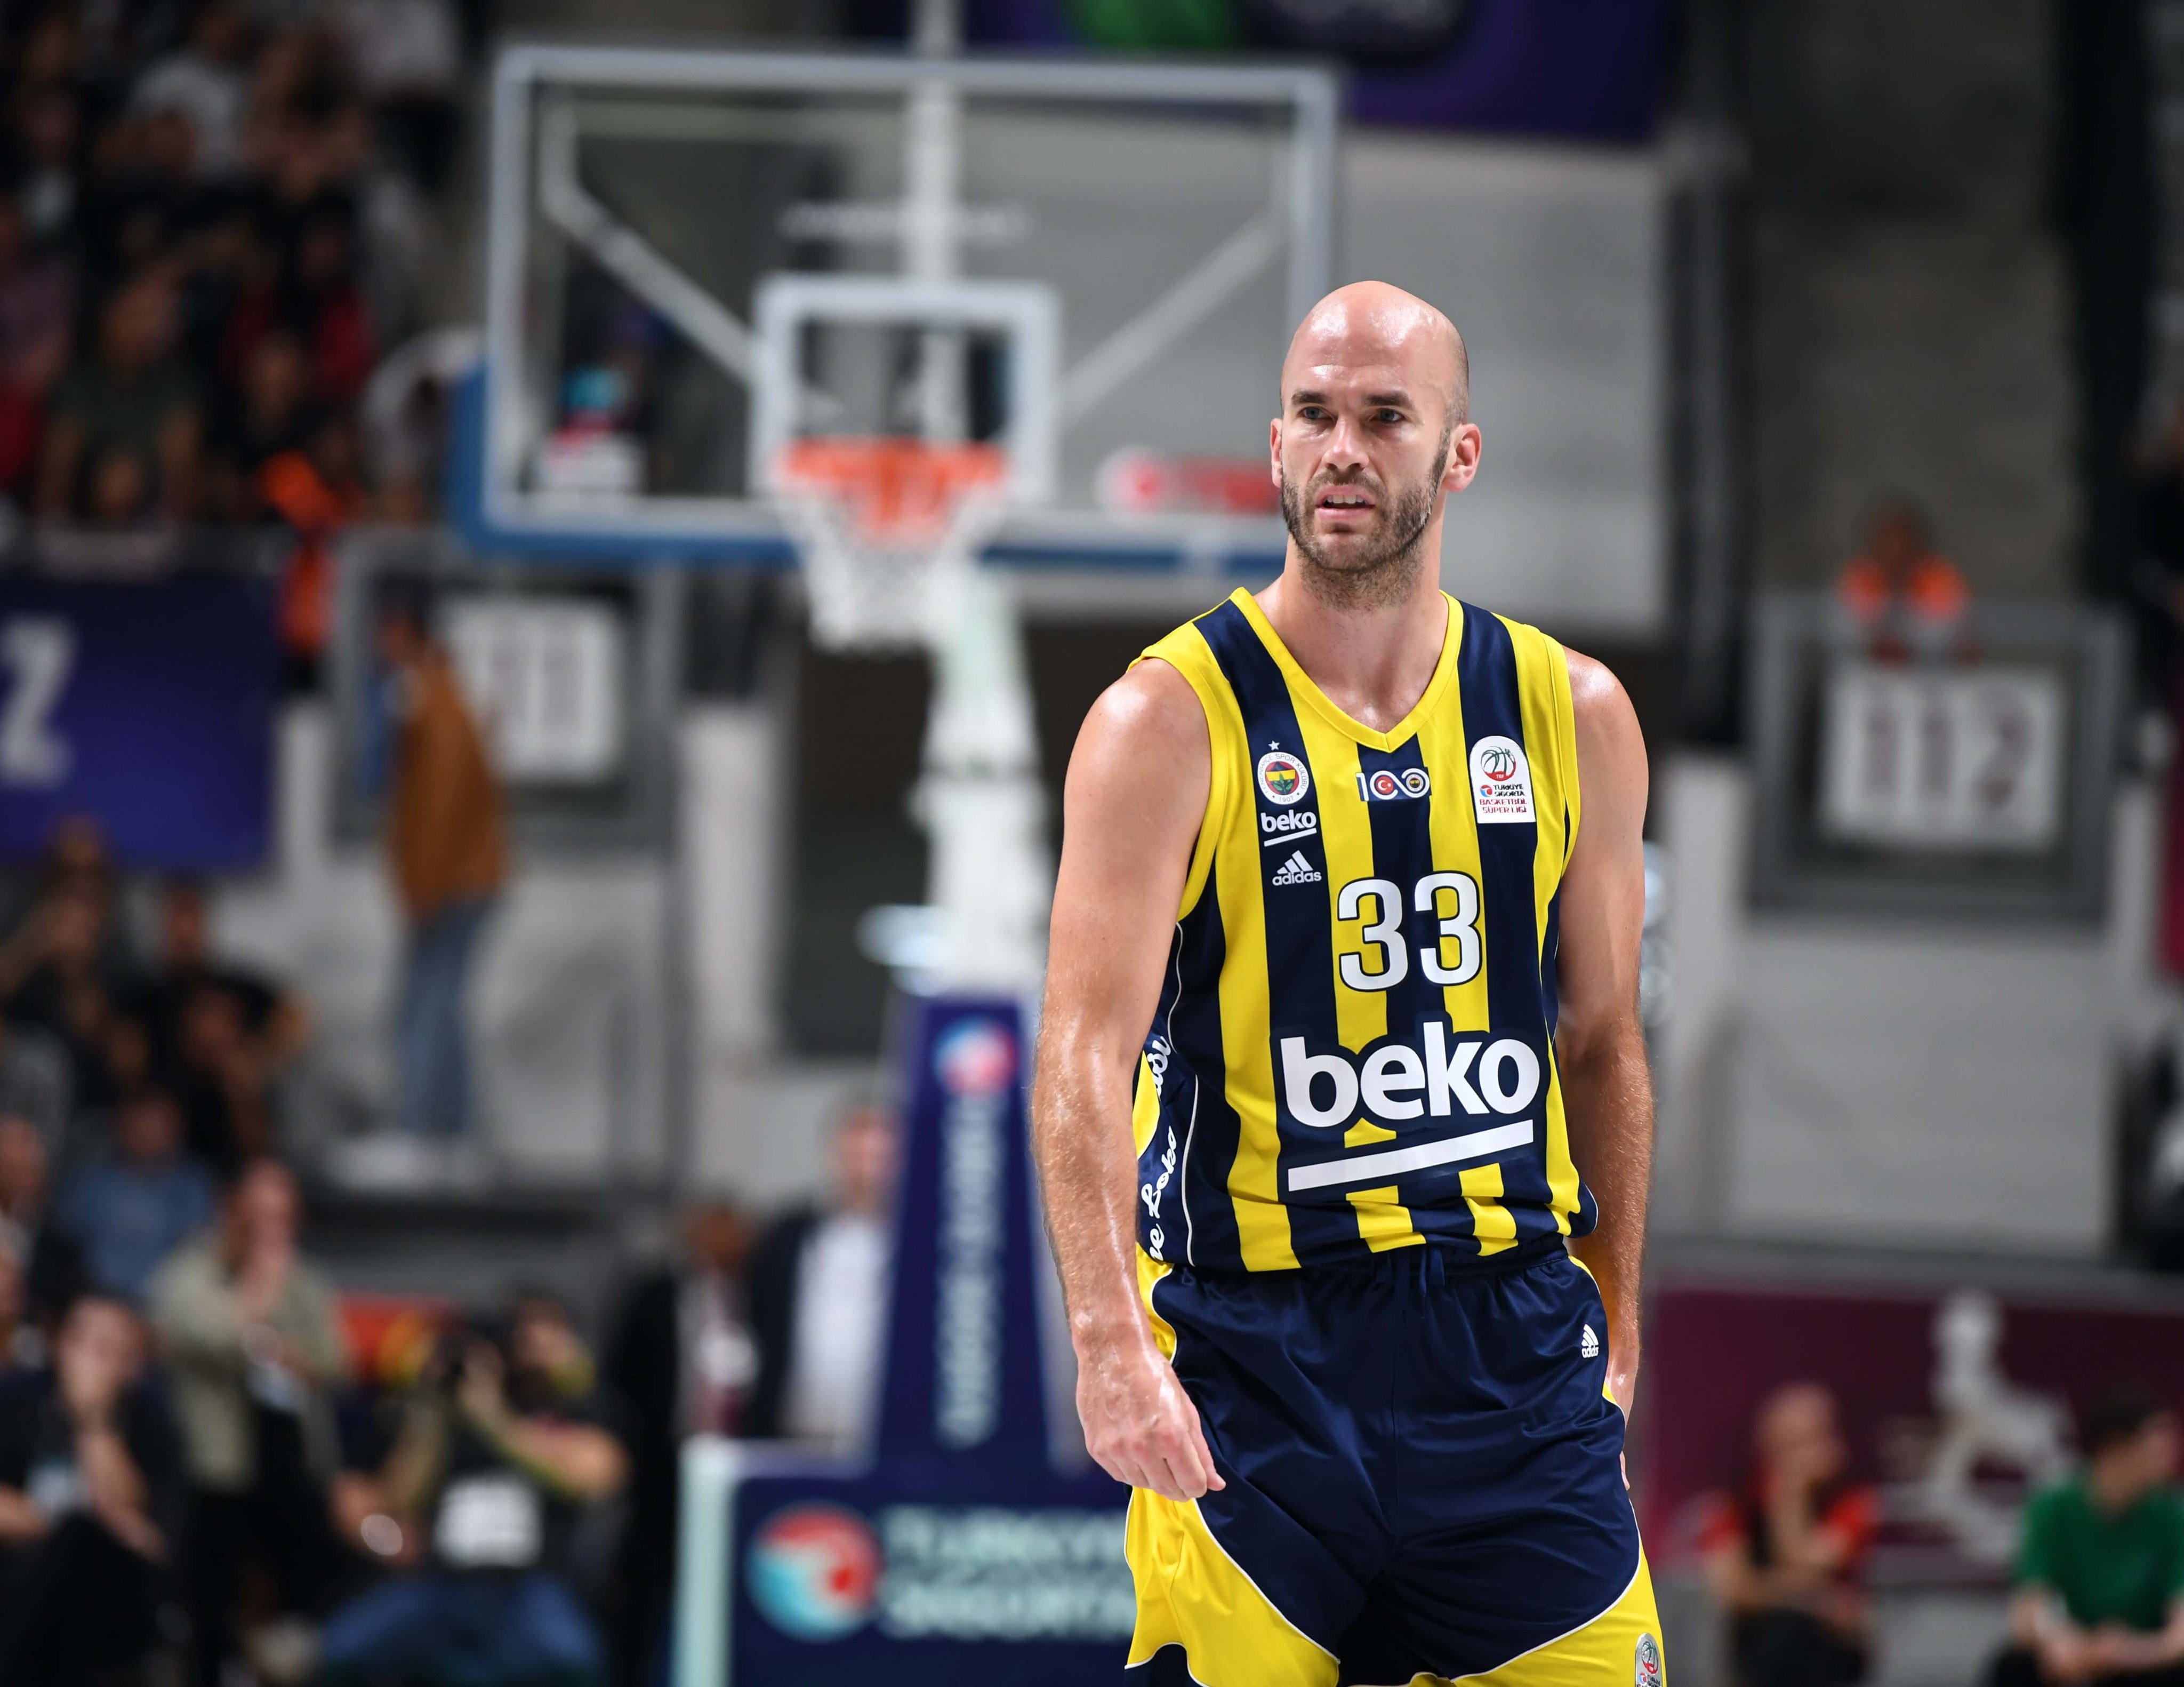 Fenerbahce without Pierre, Sanli, Calathes, Guduric, and Birsen